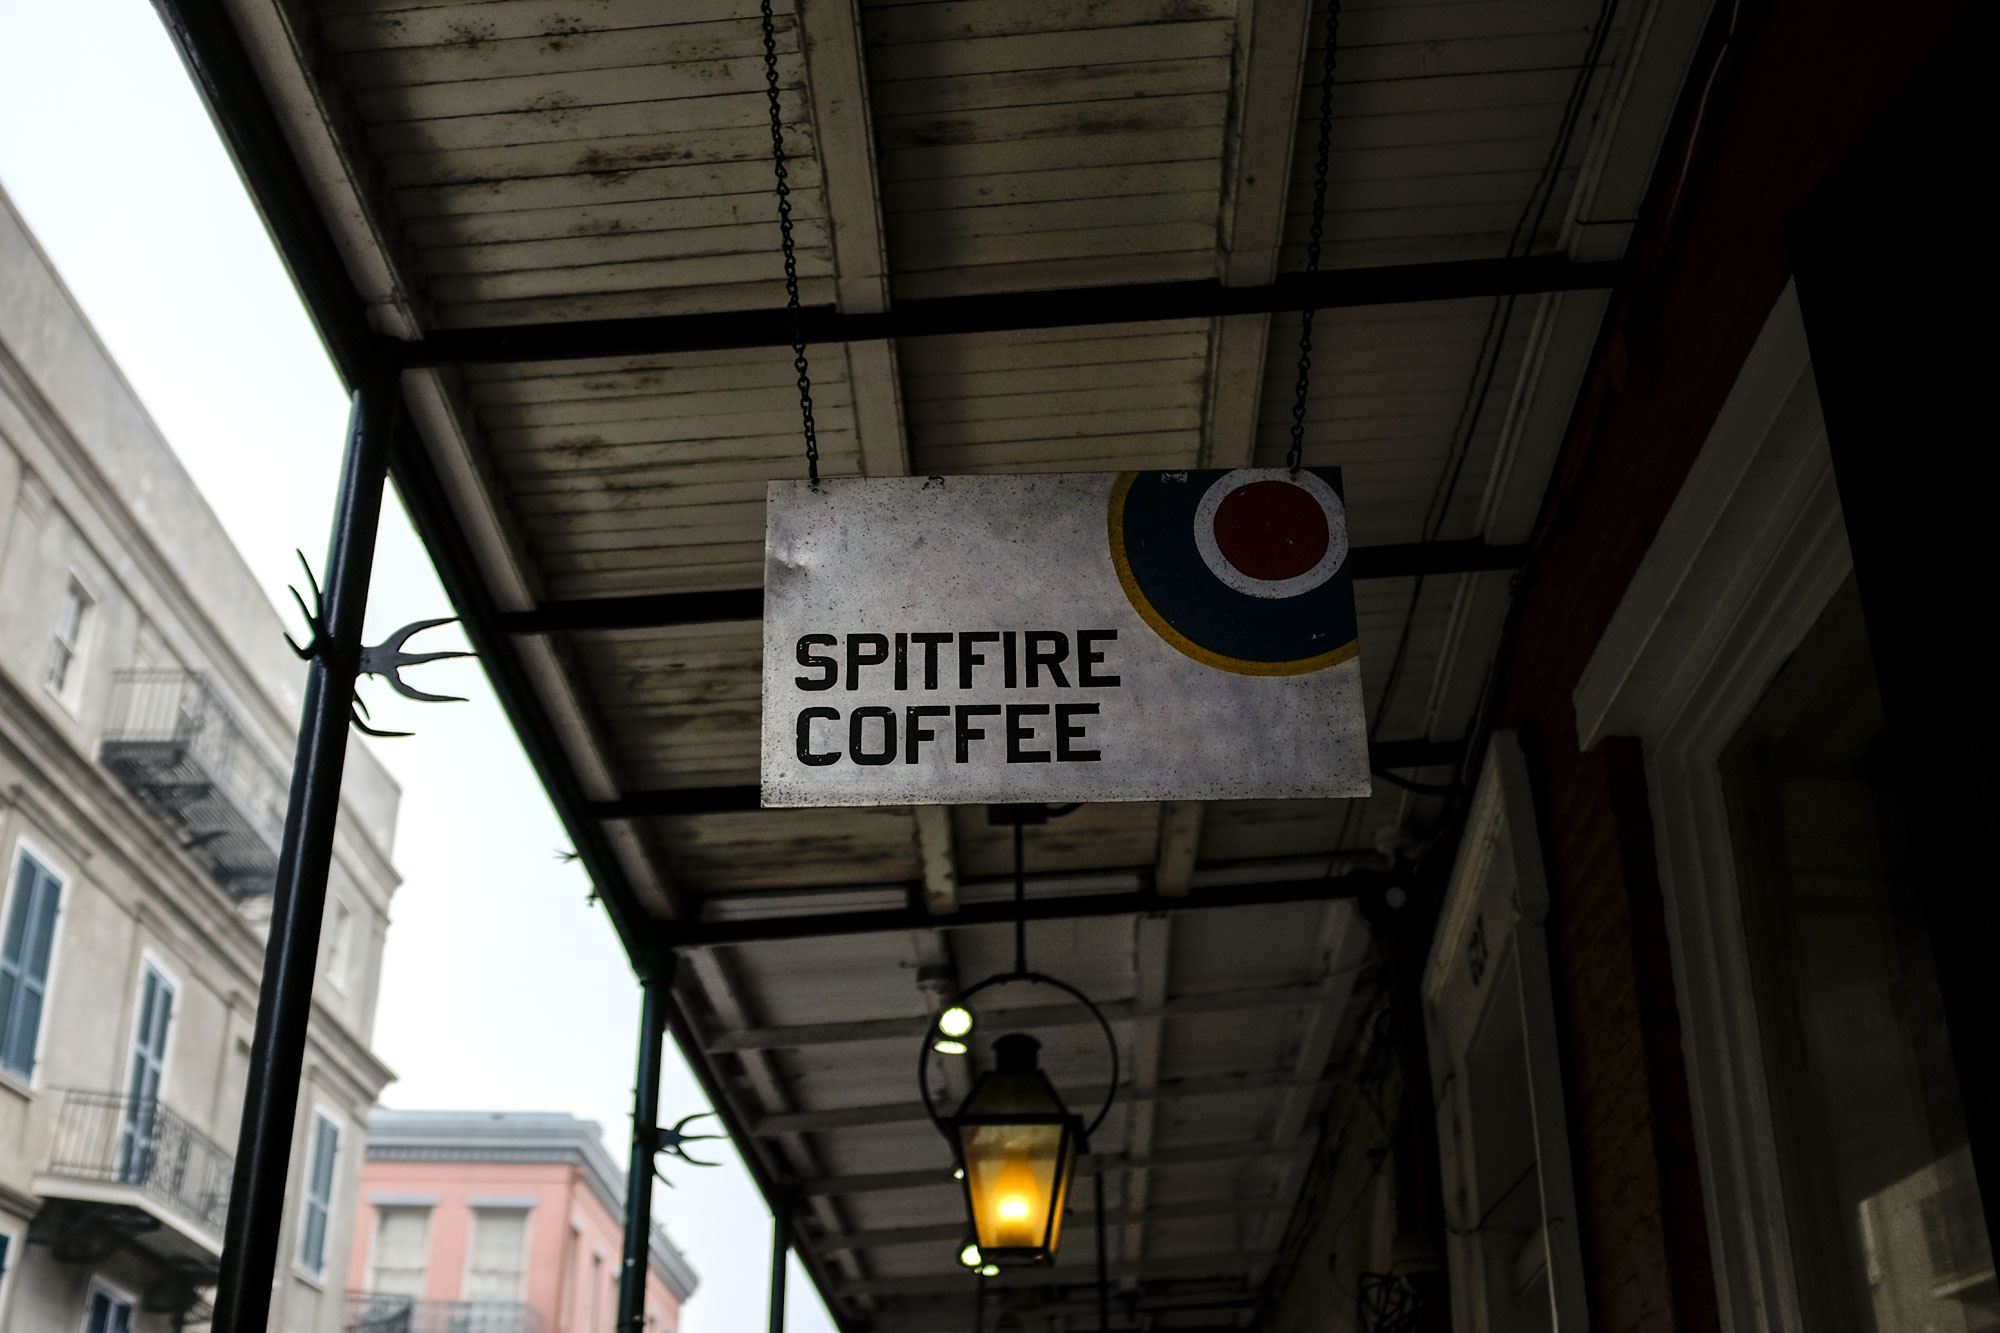 Spitfire Coffee sign outside